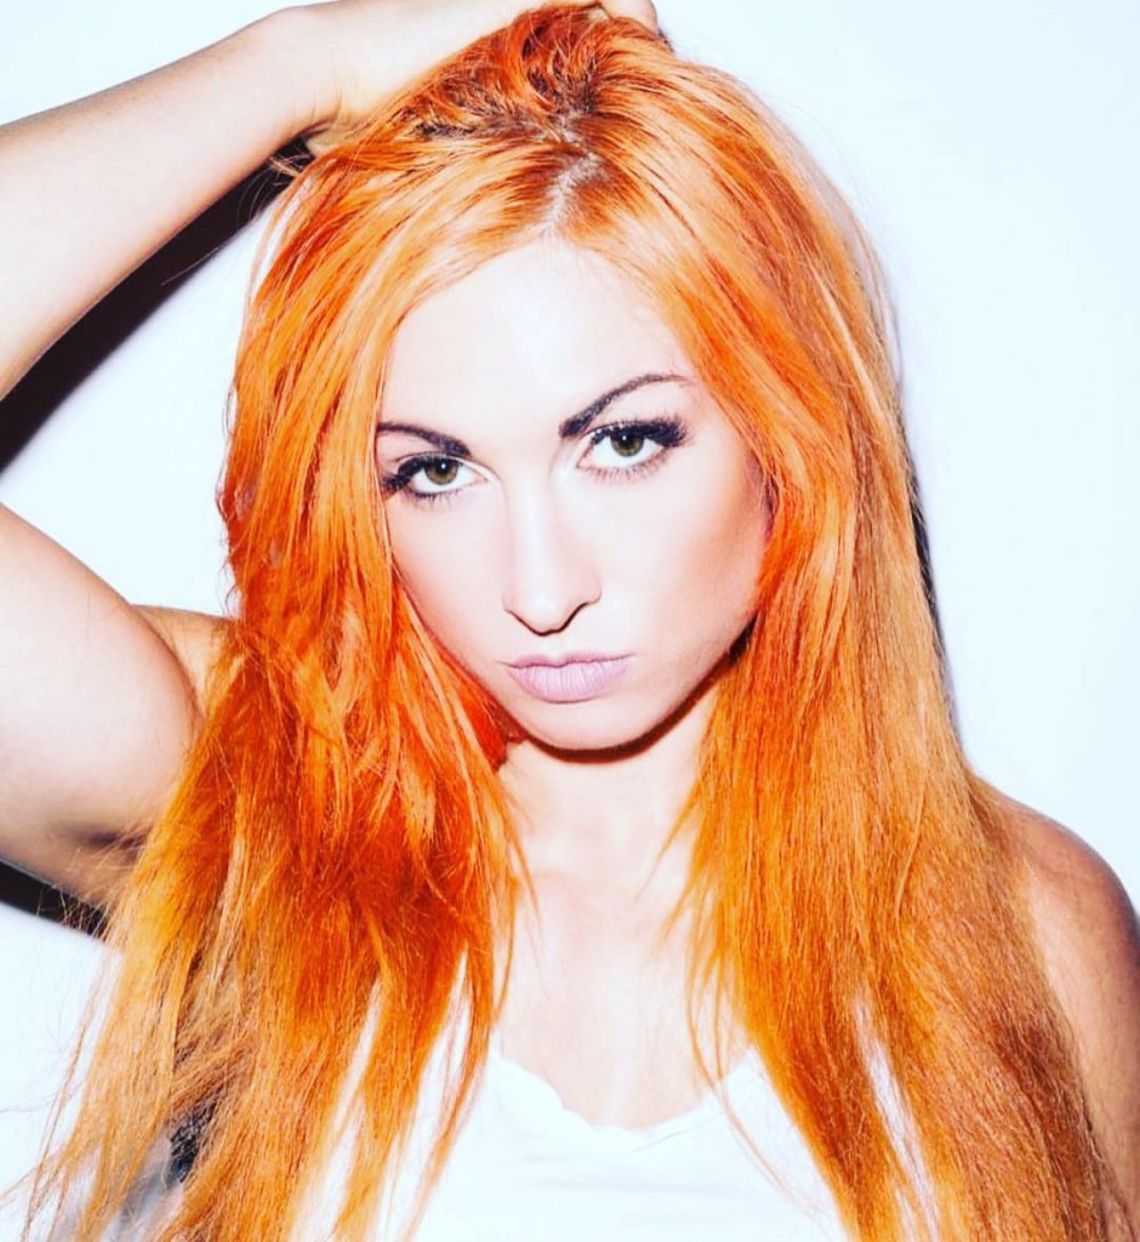 70+ Hot And Sexy Pictures of Becky Lynch – WWE Diva Will Sizzle You Up 133